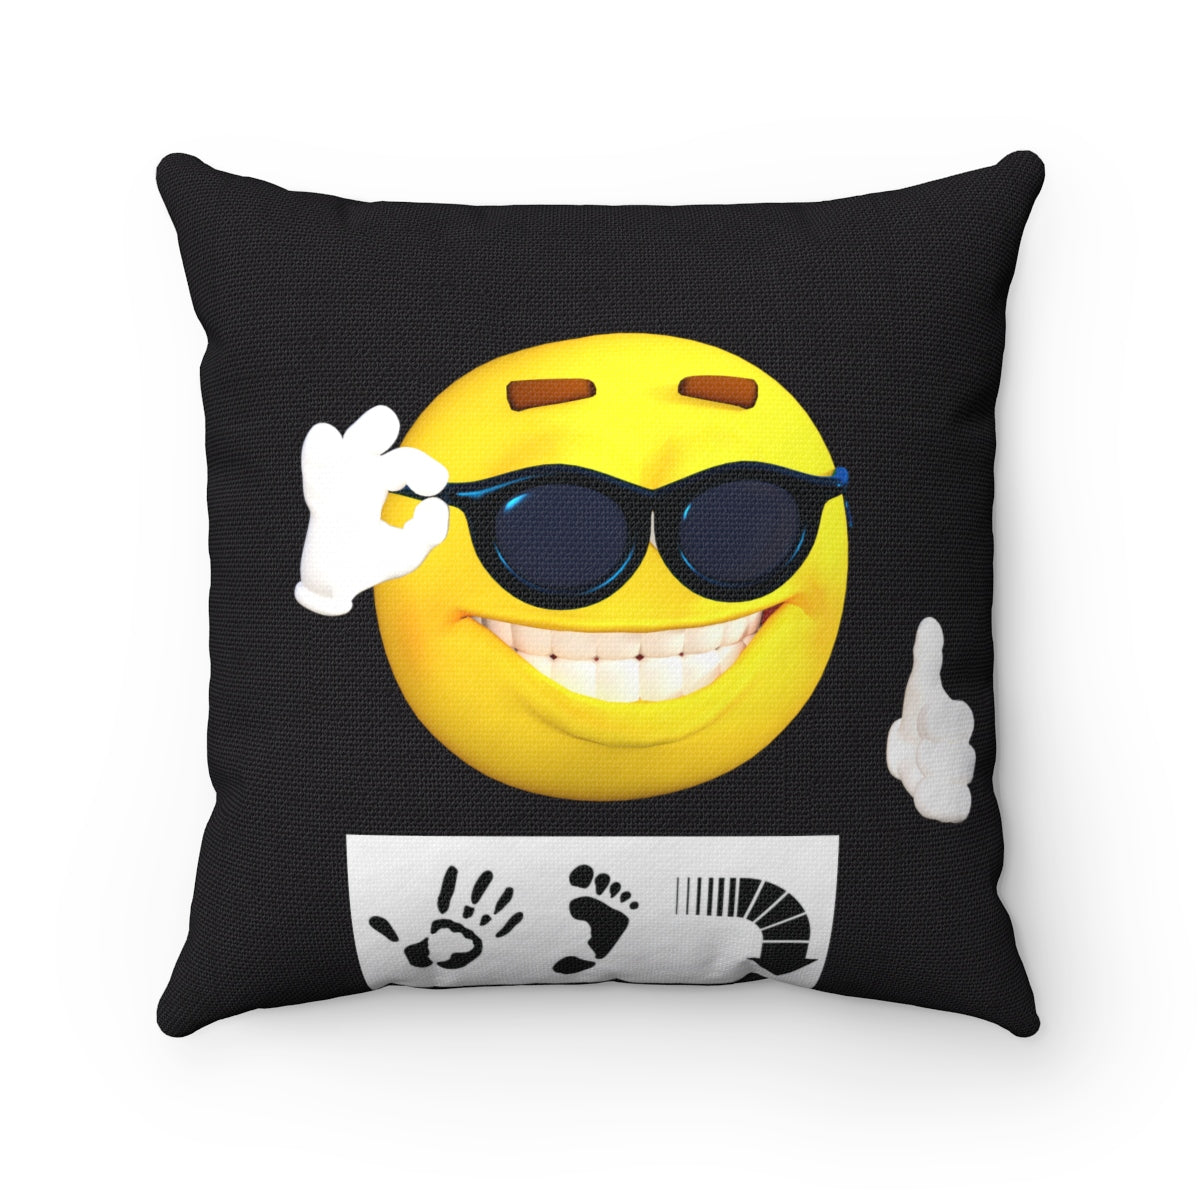 Five Toes Down Mood Spun Polyester Square Pillow